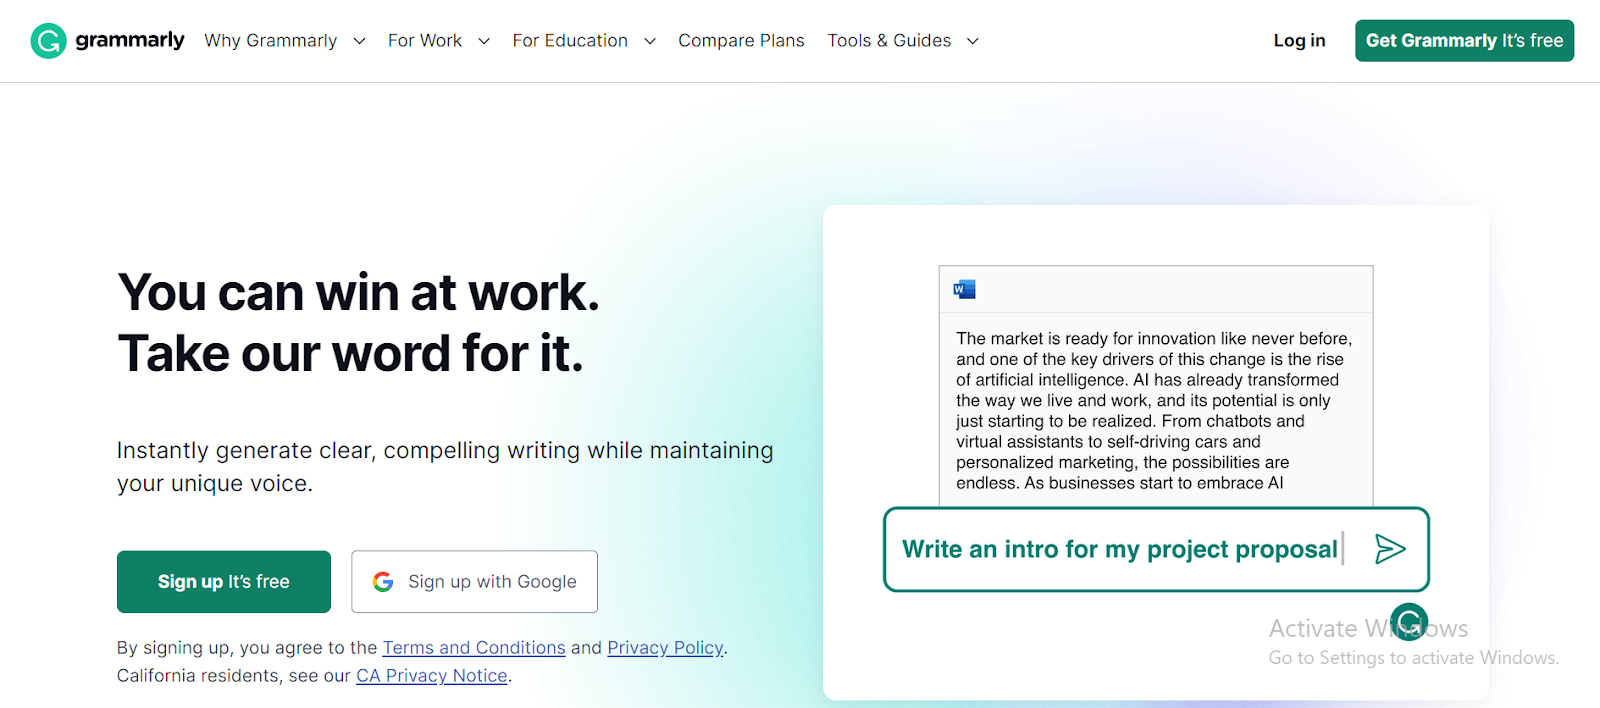 Productivity Tools for Remote Workers - Grammarly